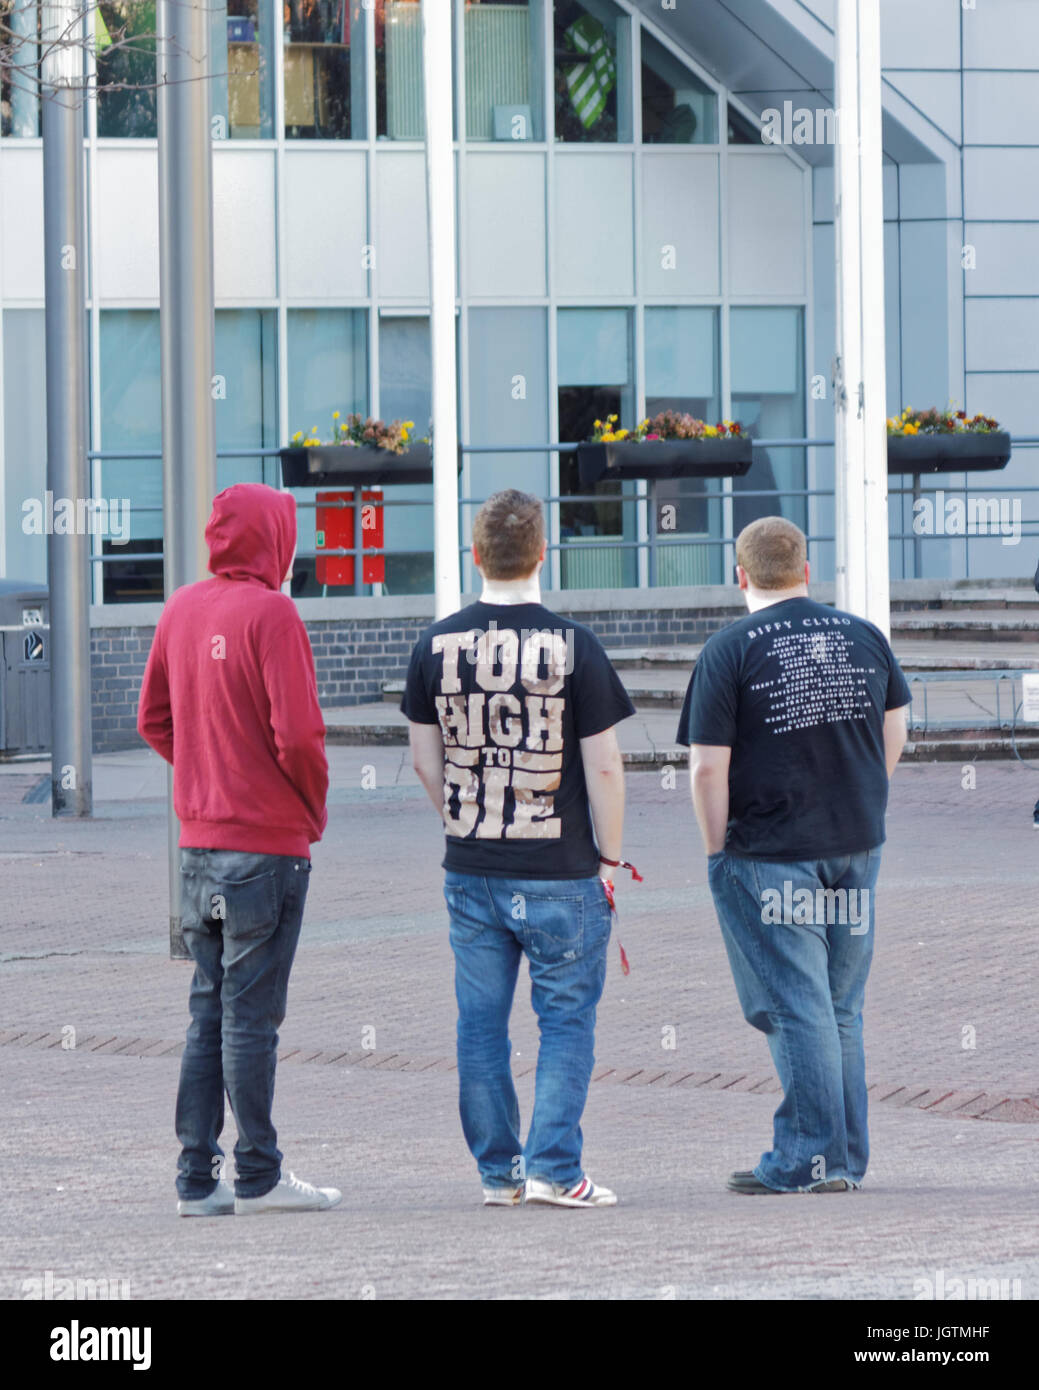 three young guys students teenagers boys viewed from behind in a cityscene setting 'too high to die tee shirt' hoody hoodie Stock Photo